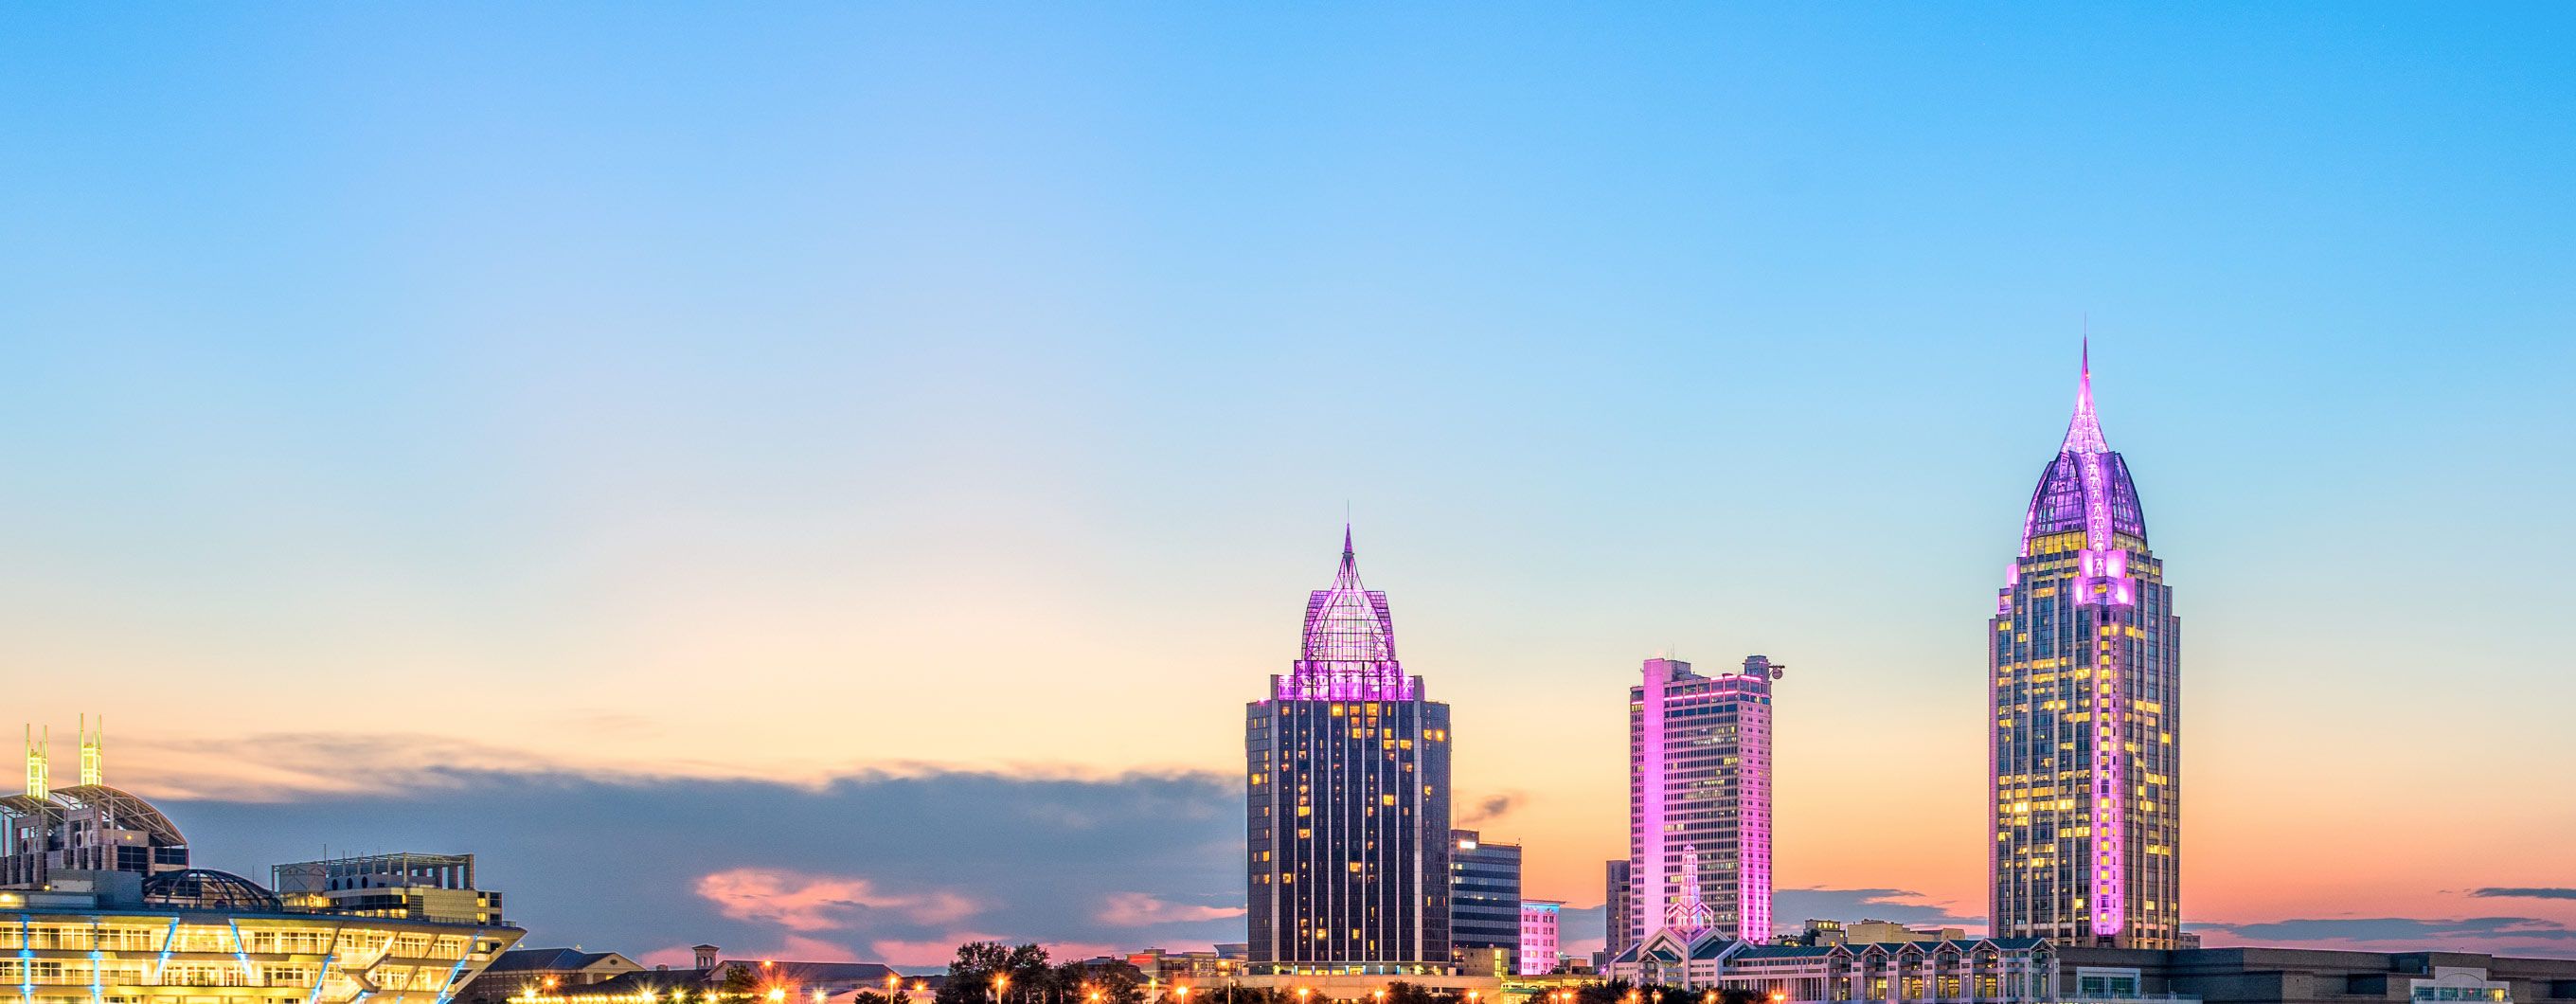 Image of three Alabama skyscrapers lit up pink with the sun setting behind them